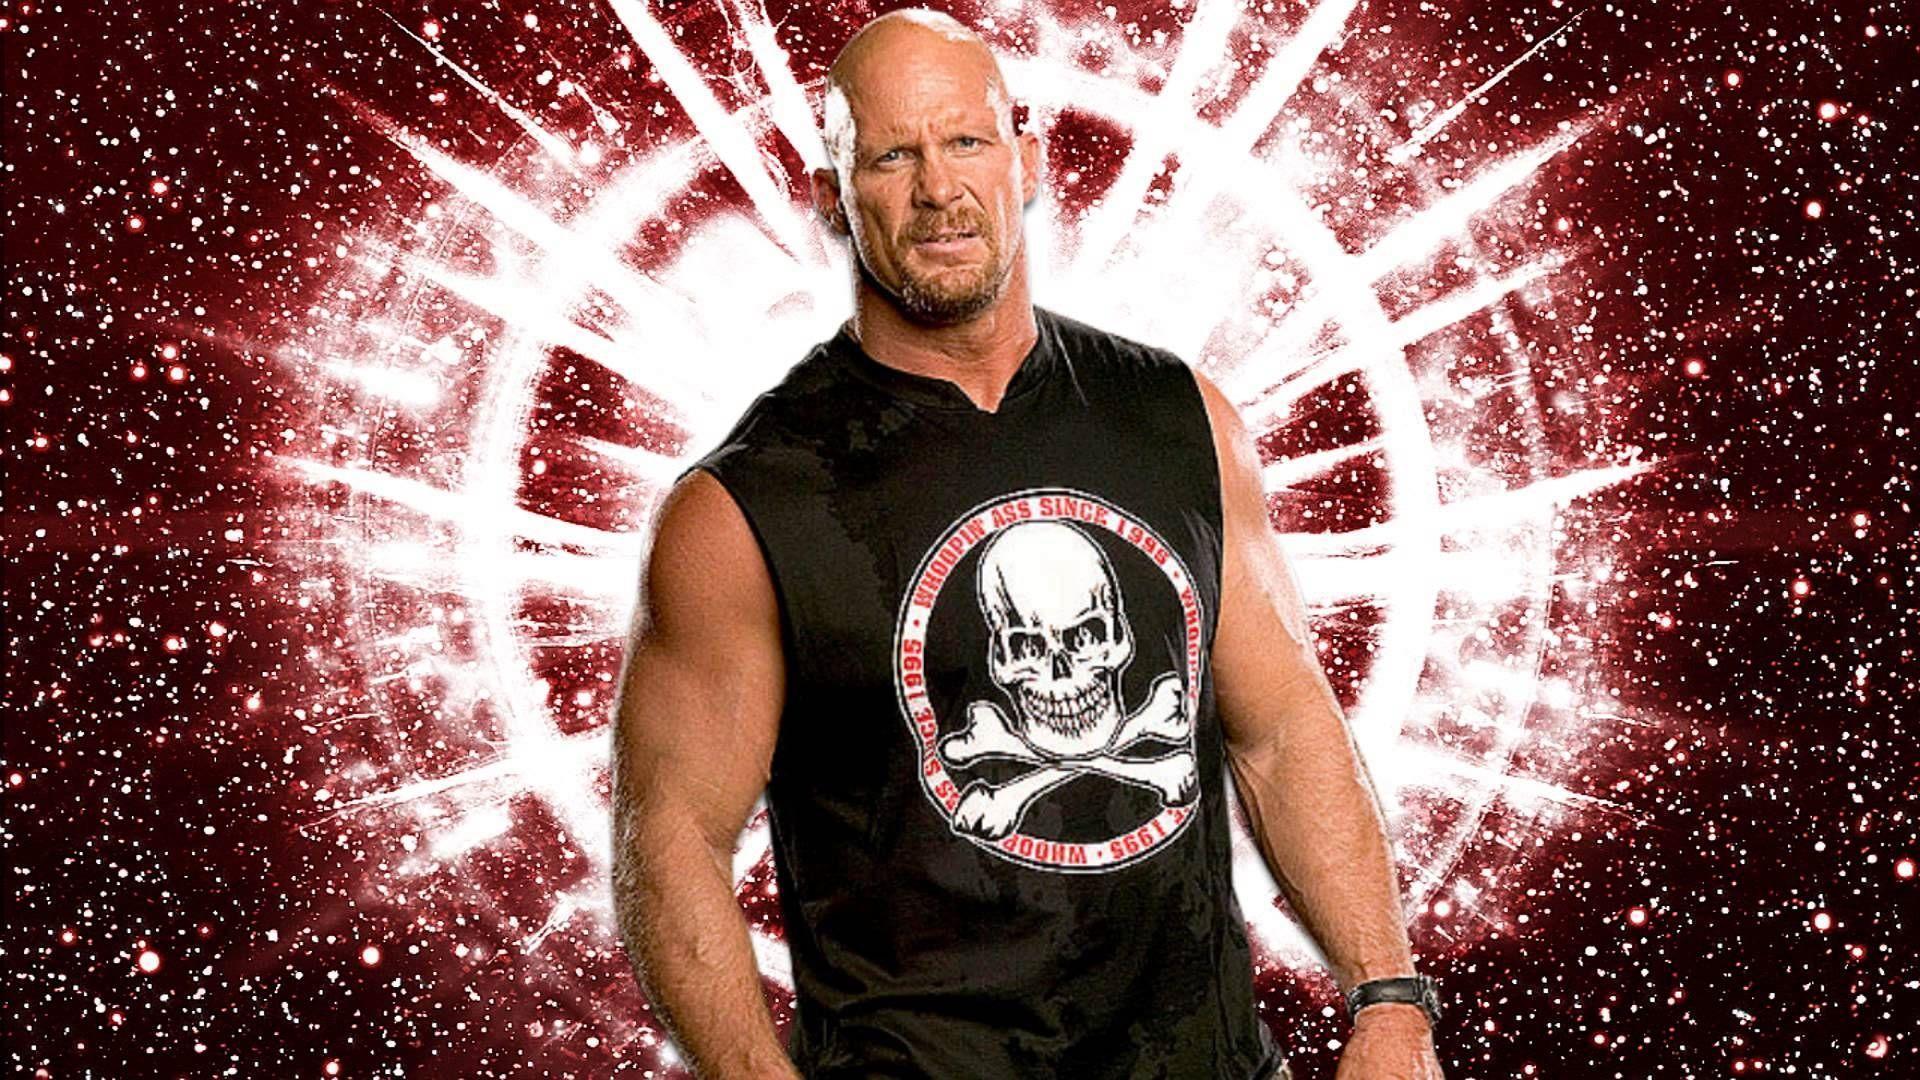 Stone Cold Steve Austin Angry Face Closeup HD Wallpaper